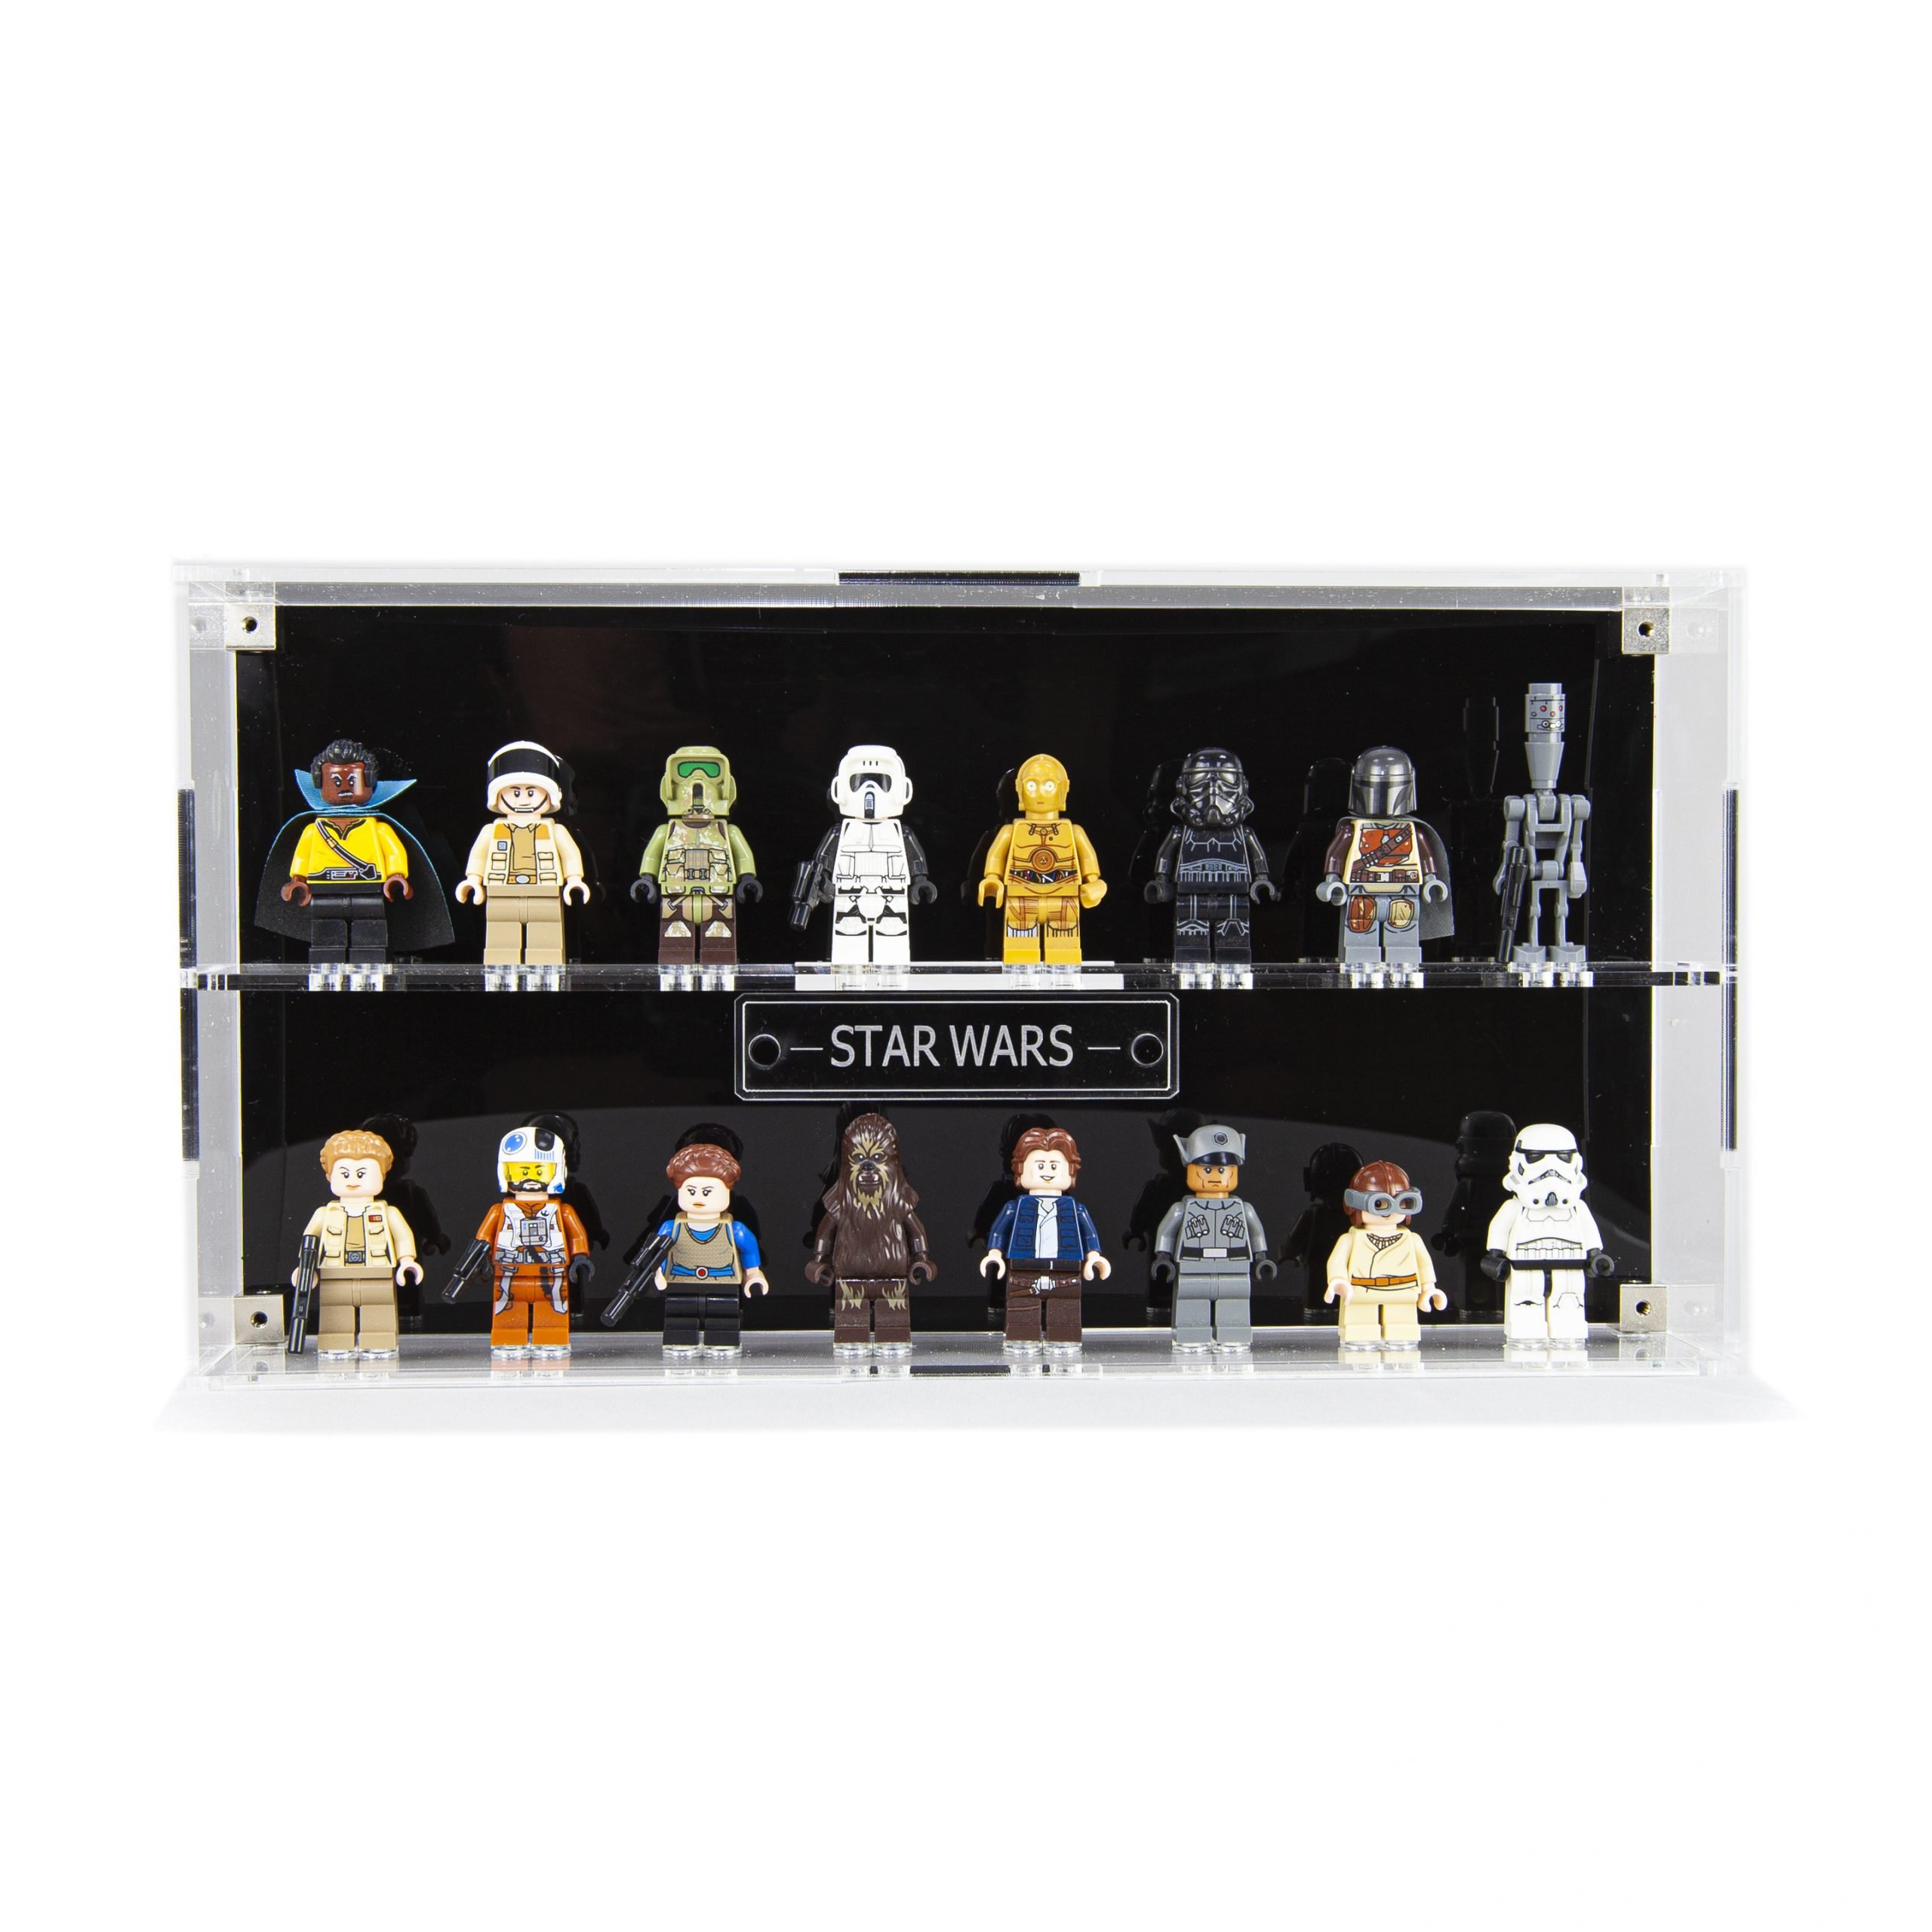 Display case frame for Lego Star Wars Minifigures minifigs figures 